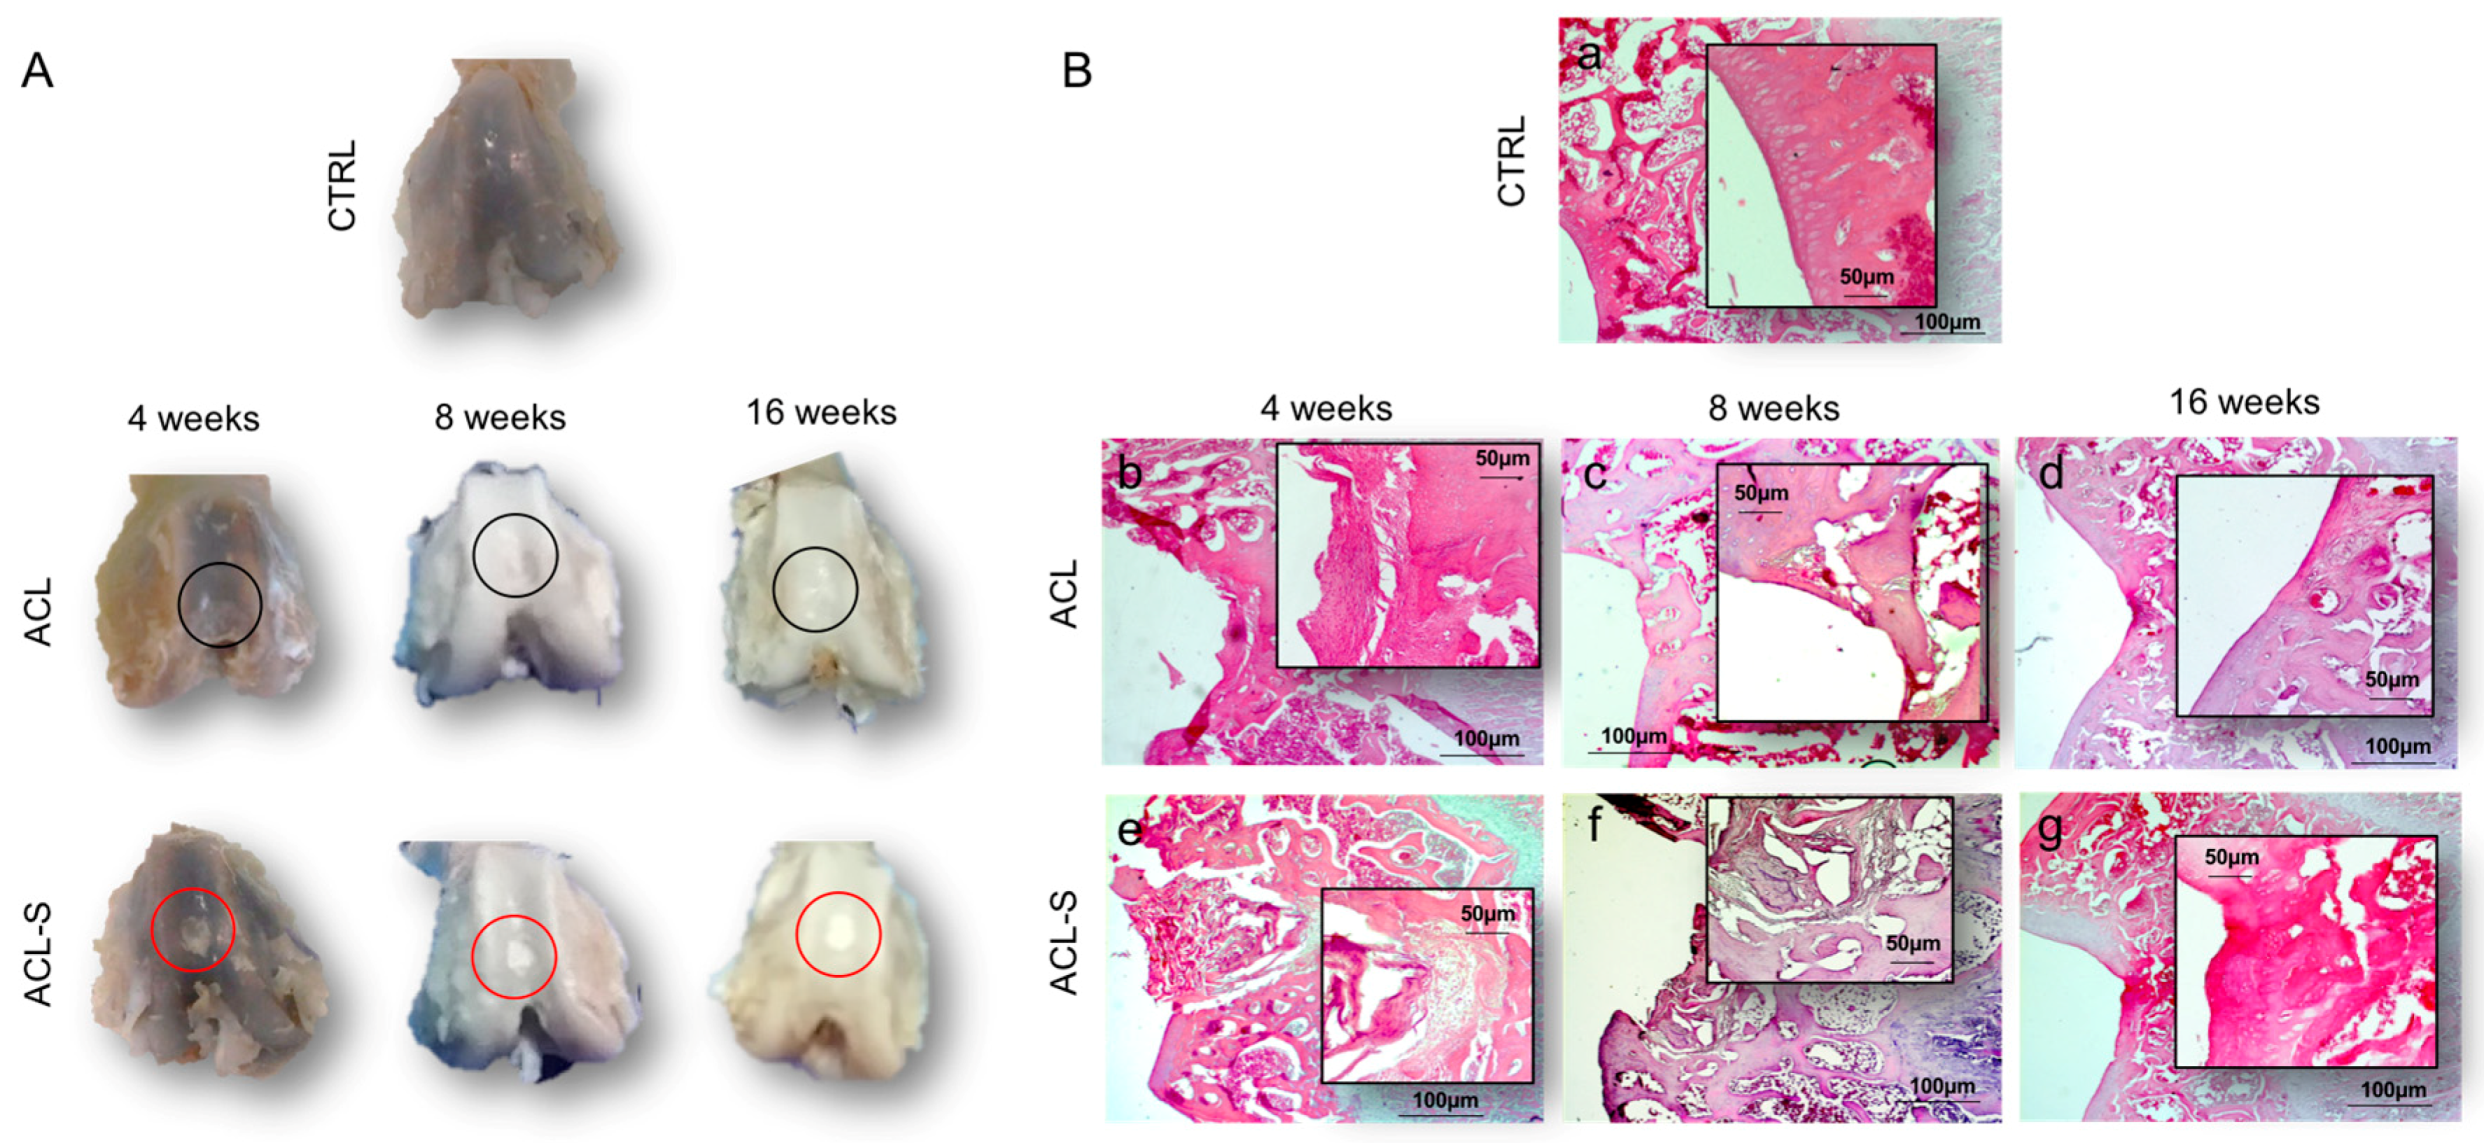 Materials Free Full Text Evaluation Of A Cell Free Collagen Type I Based Scaffold For Articular Cartilage Regeneration In An Orthotopic Rat Model Html